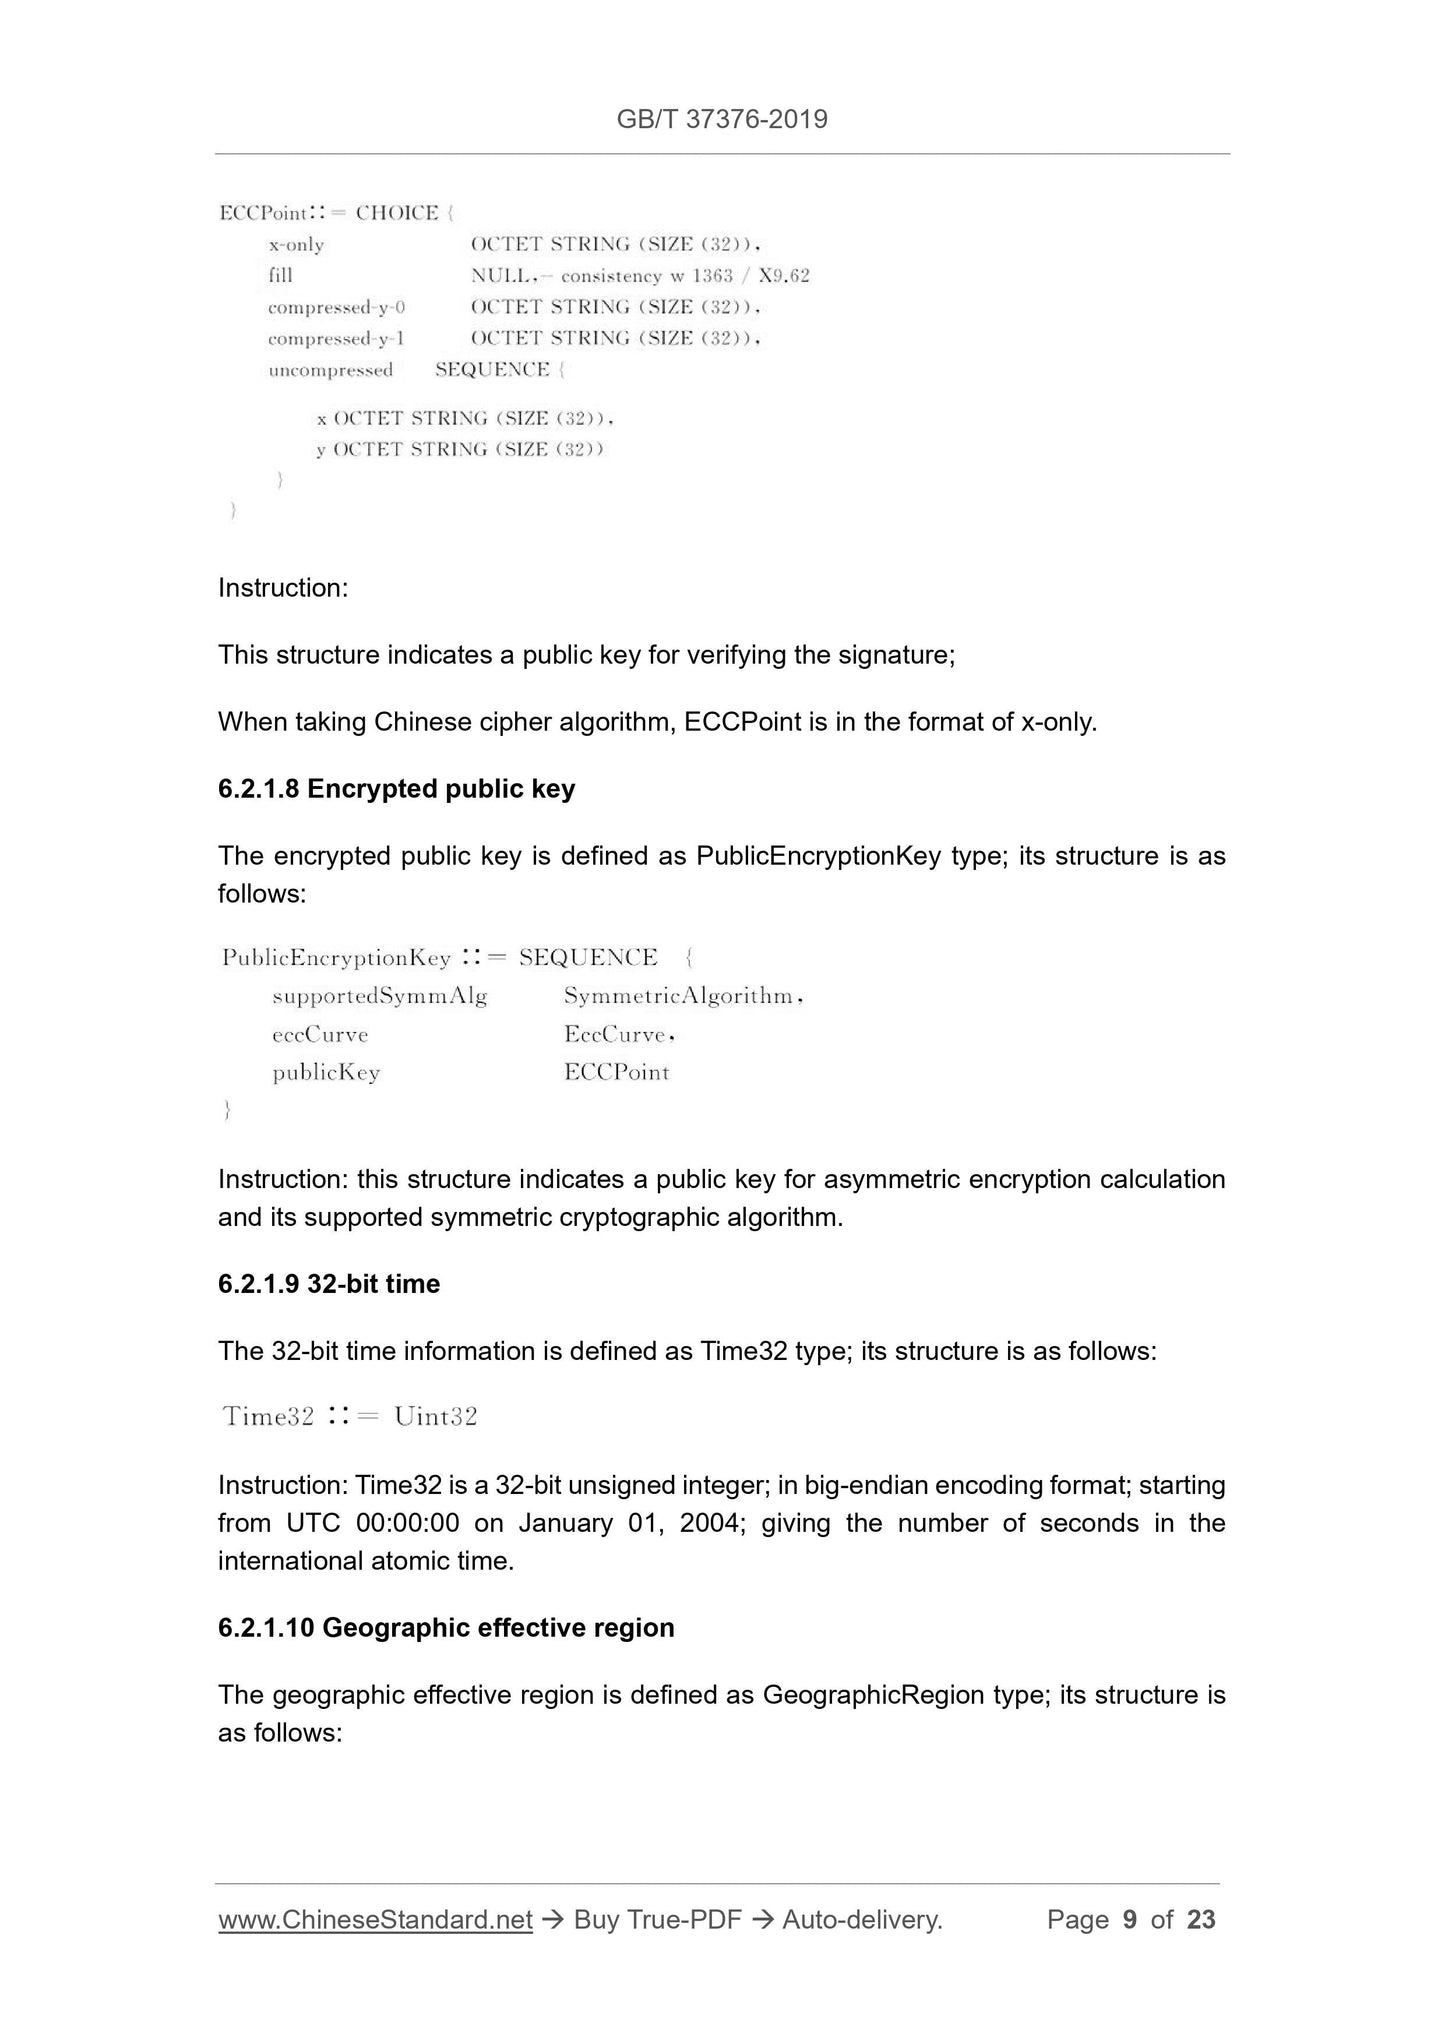 GB/T 37376-2019 Page 9